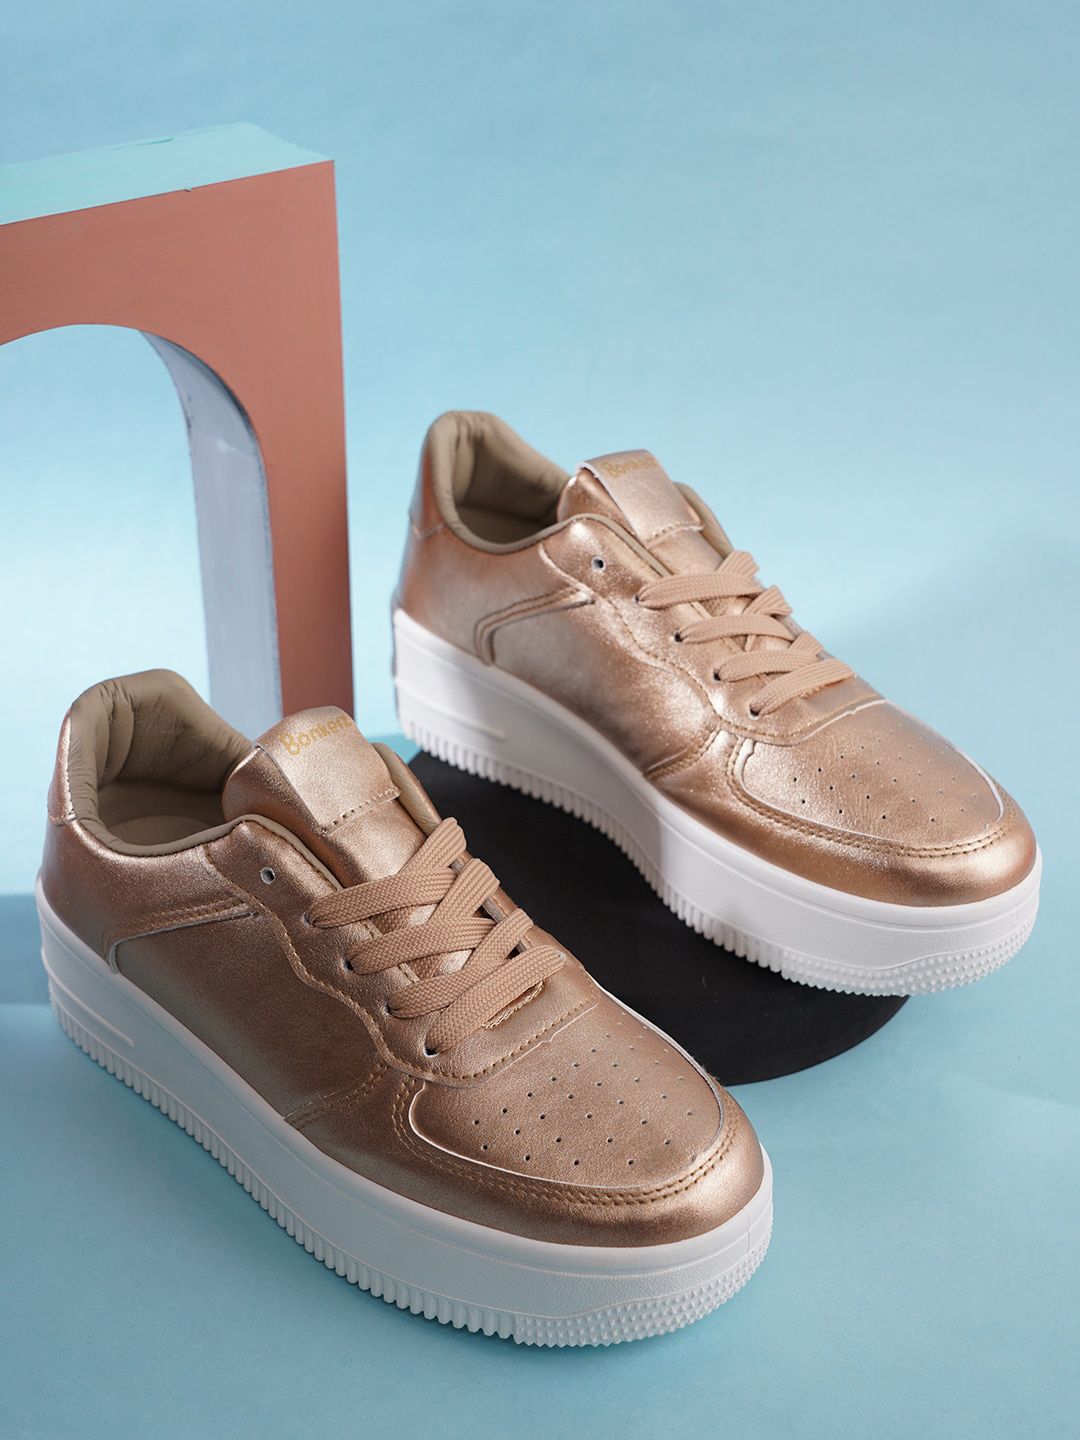 ICONICS Women Gold-Toned Sneakers Price in India